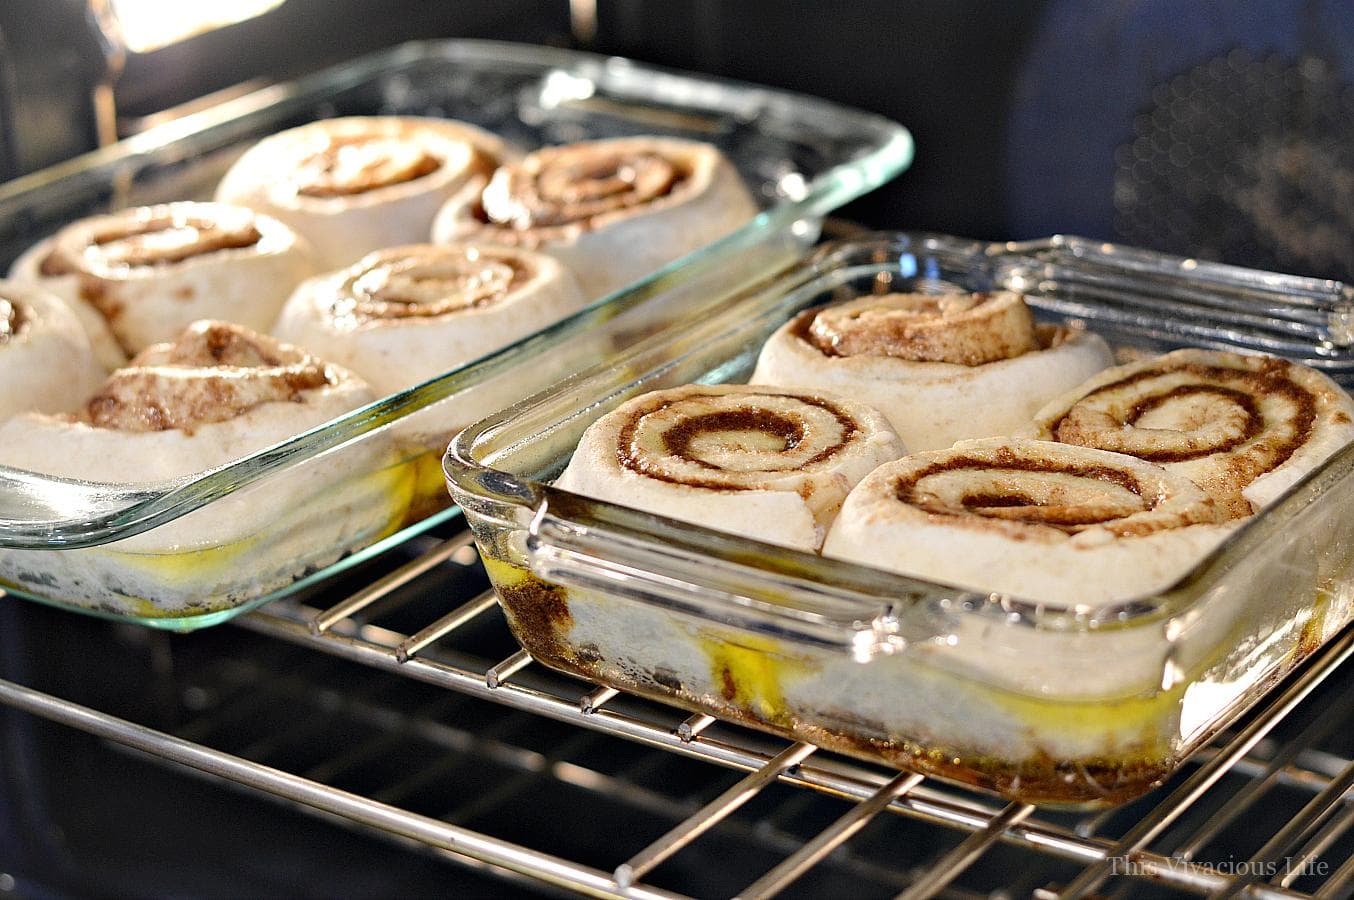 Gluten-free cinnamon rolls in two baking dishes rising in the oven.